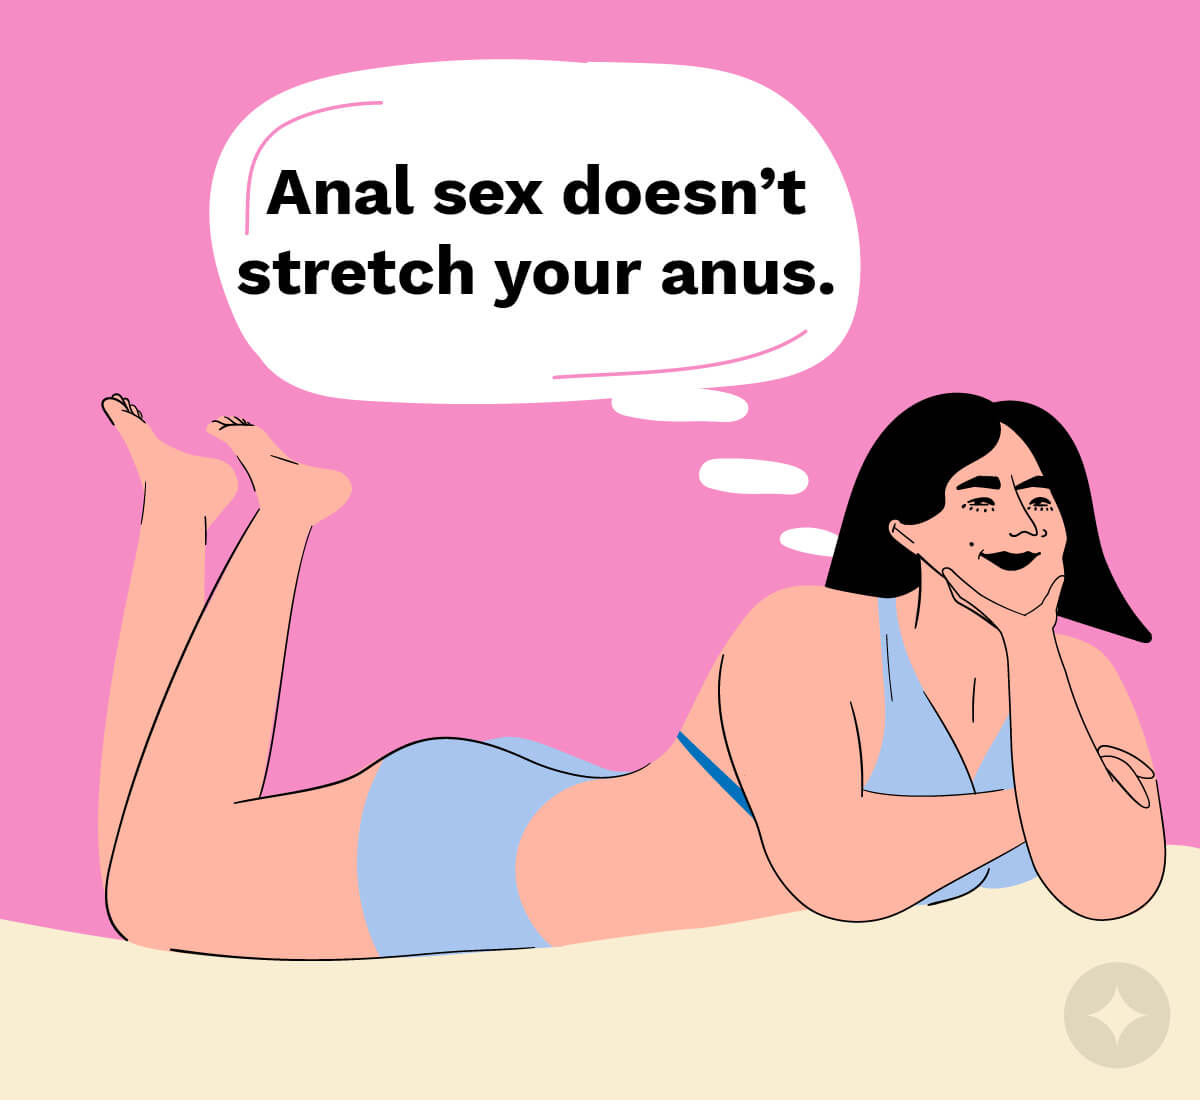 One of the most common myths about anal play is that it's painful